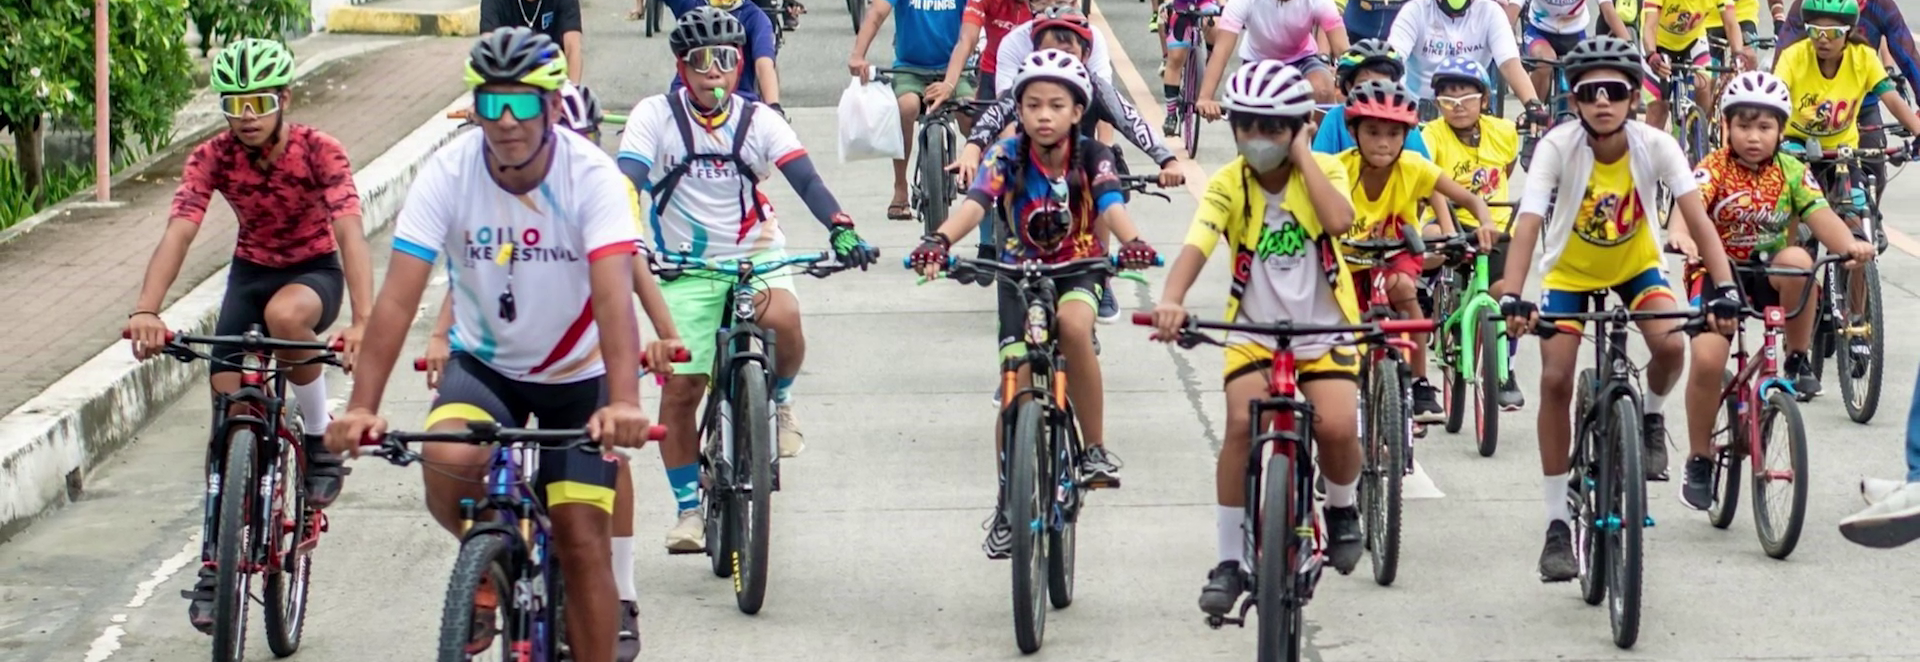 Healthy mobility and public recreational spaces: Boosting physical activity in the Philippines to prevent NCDs and mental health conditions 